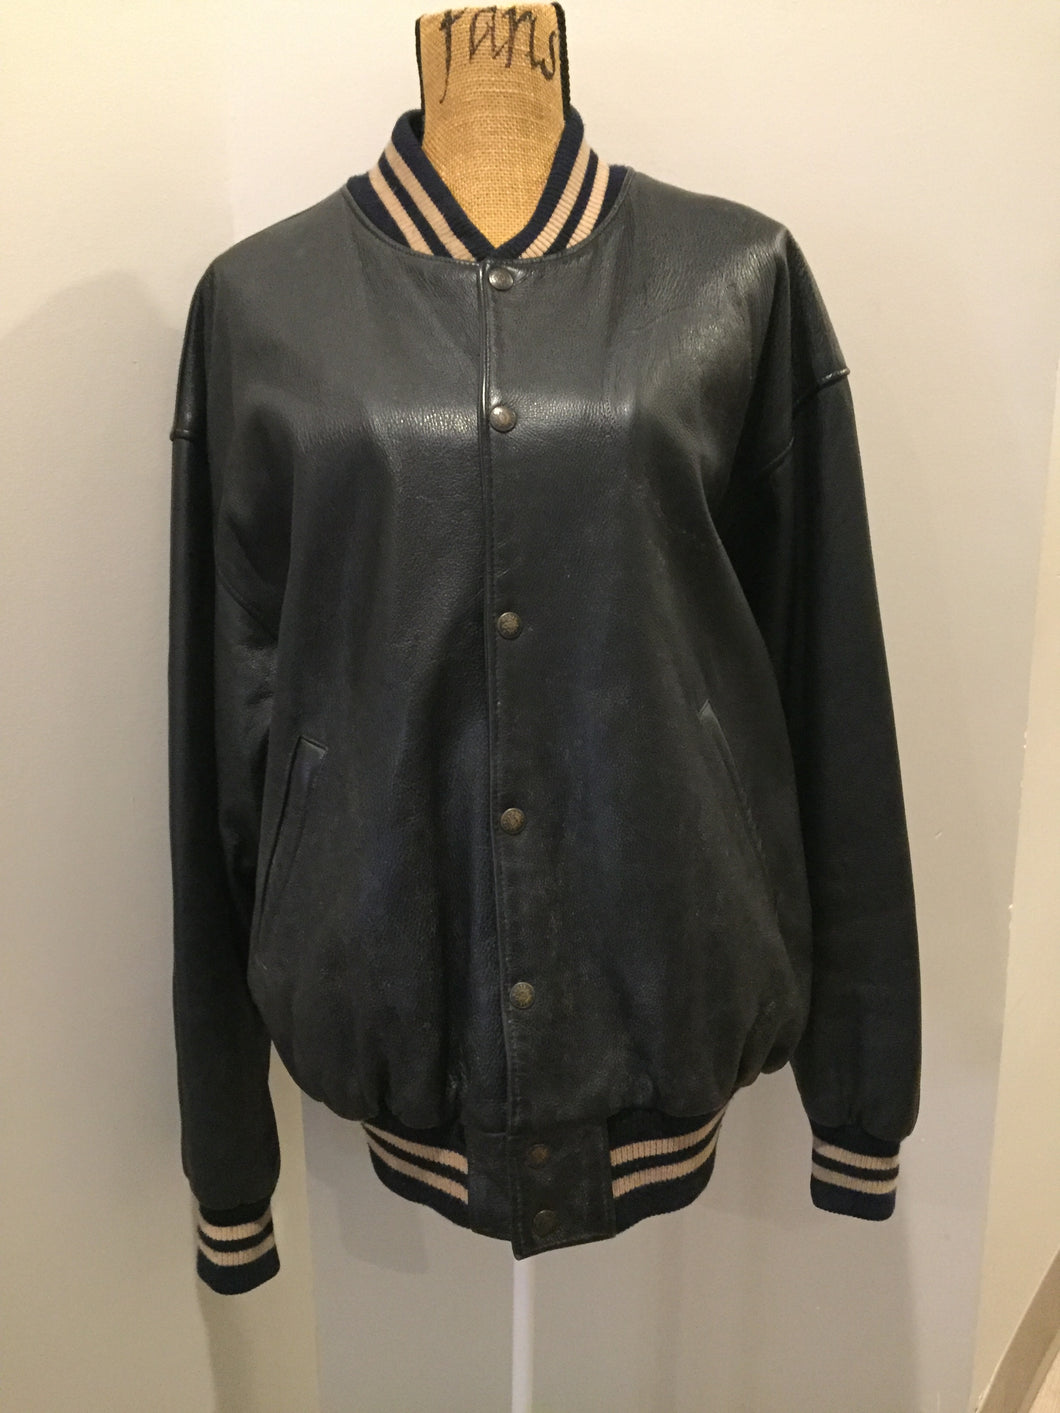 Kingspier Vintage - Roots leather varsity jacket in black with blue and brown ribbing, snap closures and slash pockets. Size large.